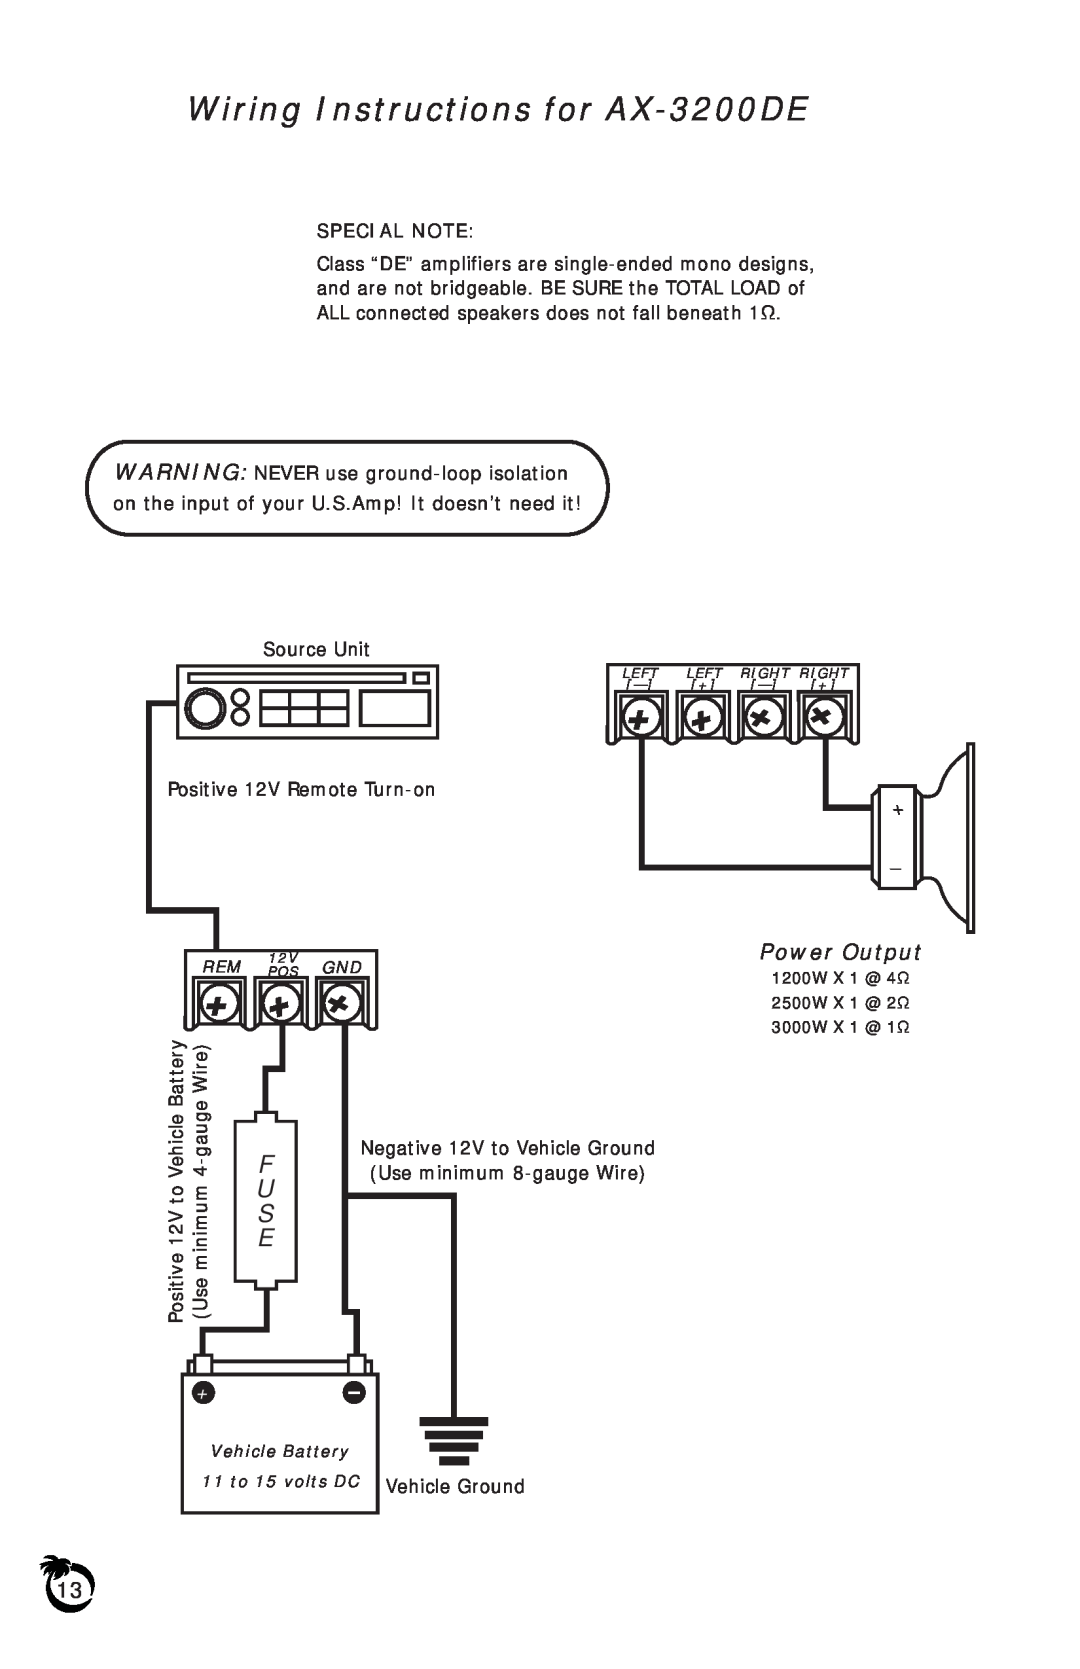 US Amps Wiring Instructions for AX-3200DE, Power Output, Special Note, Vehicle Battery 11 to 15 volts DC Vehicle Ground 